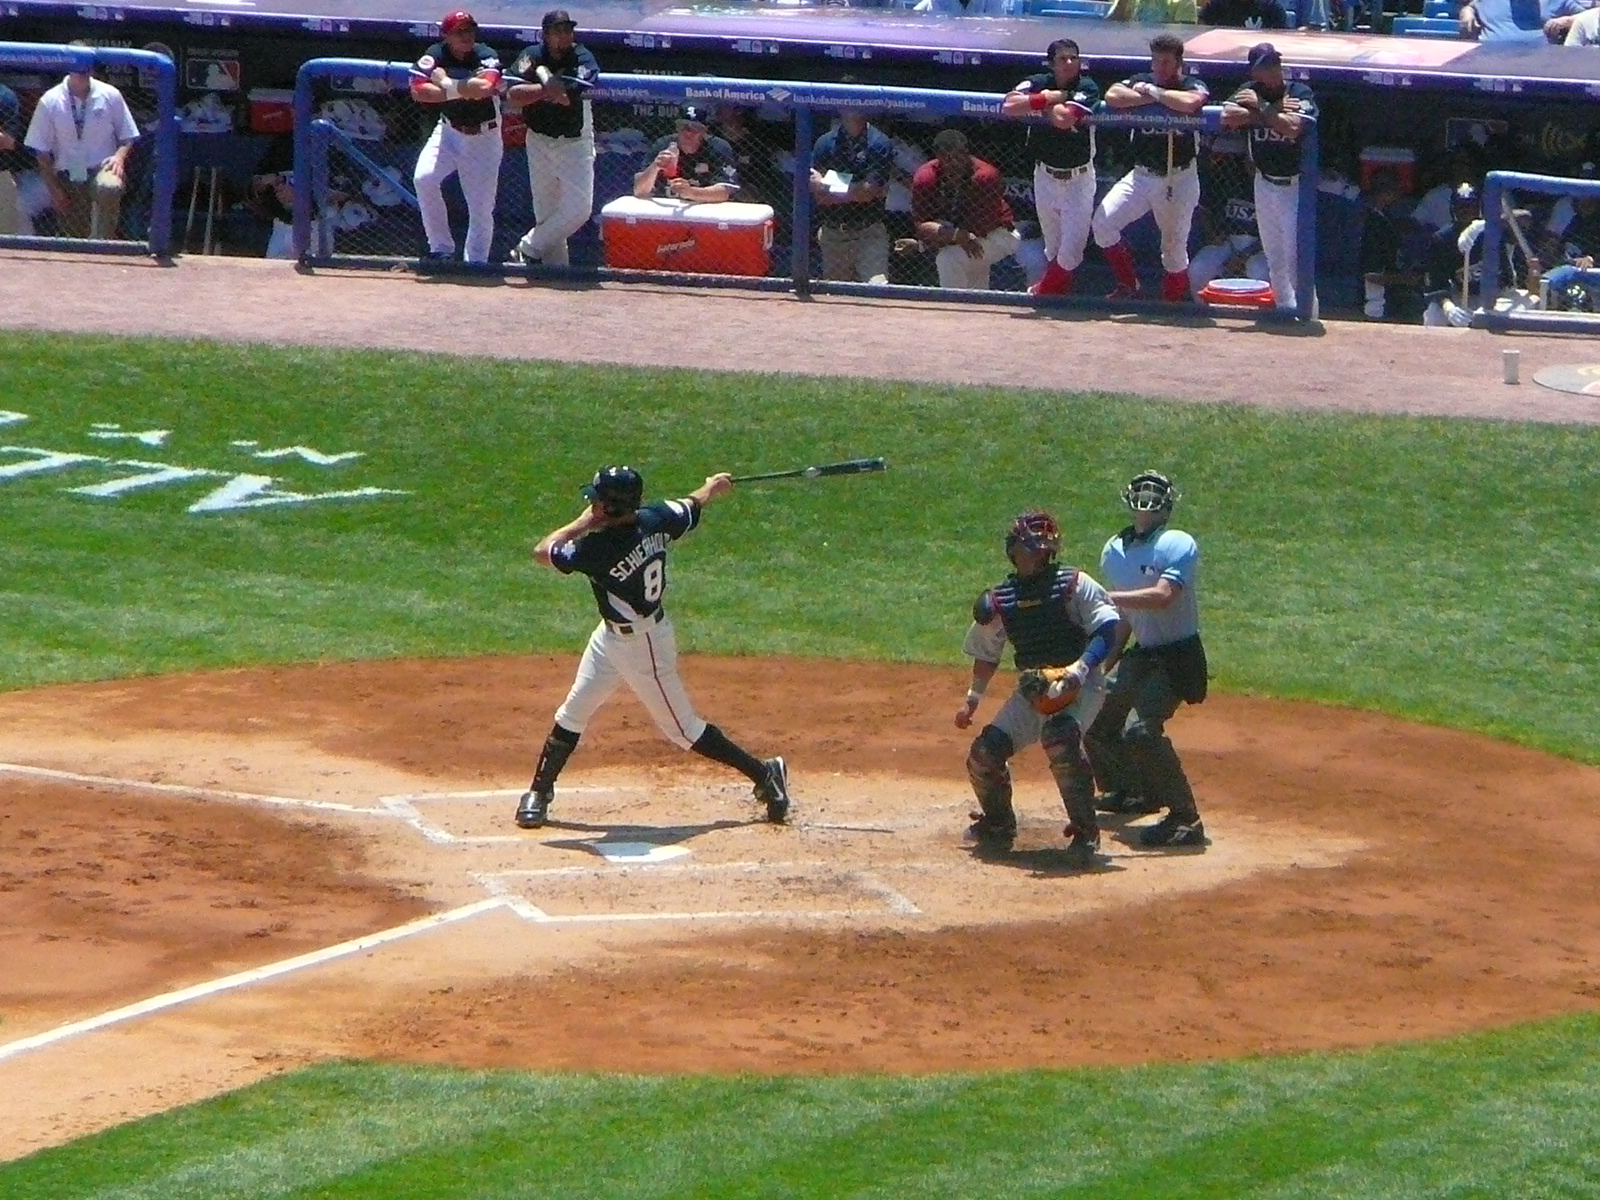 FILE - In this July 16, 2005, file photo, Cleveland Indians' Grady Sizemore  hits a bases-loaded single off Chicago White Sox pitcher Damaso Marte to  drive in two runs in the ninth